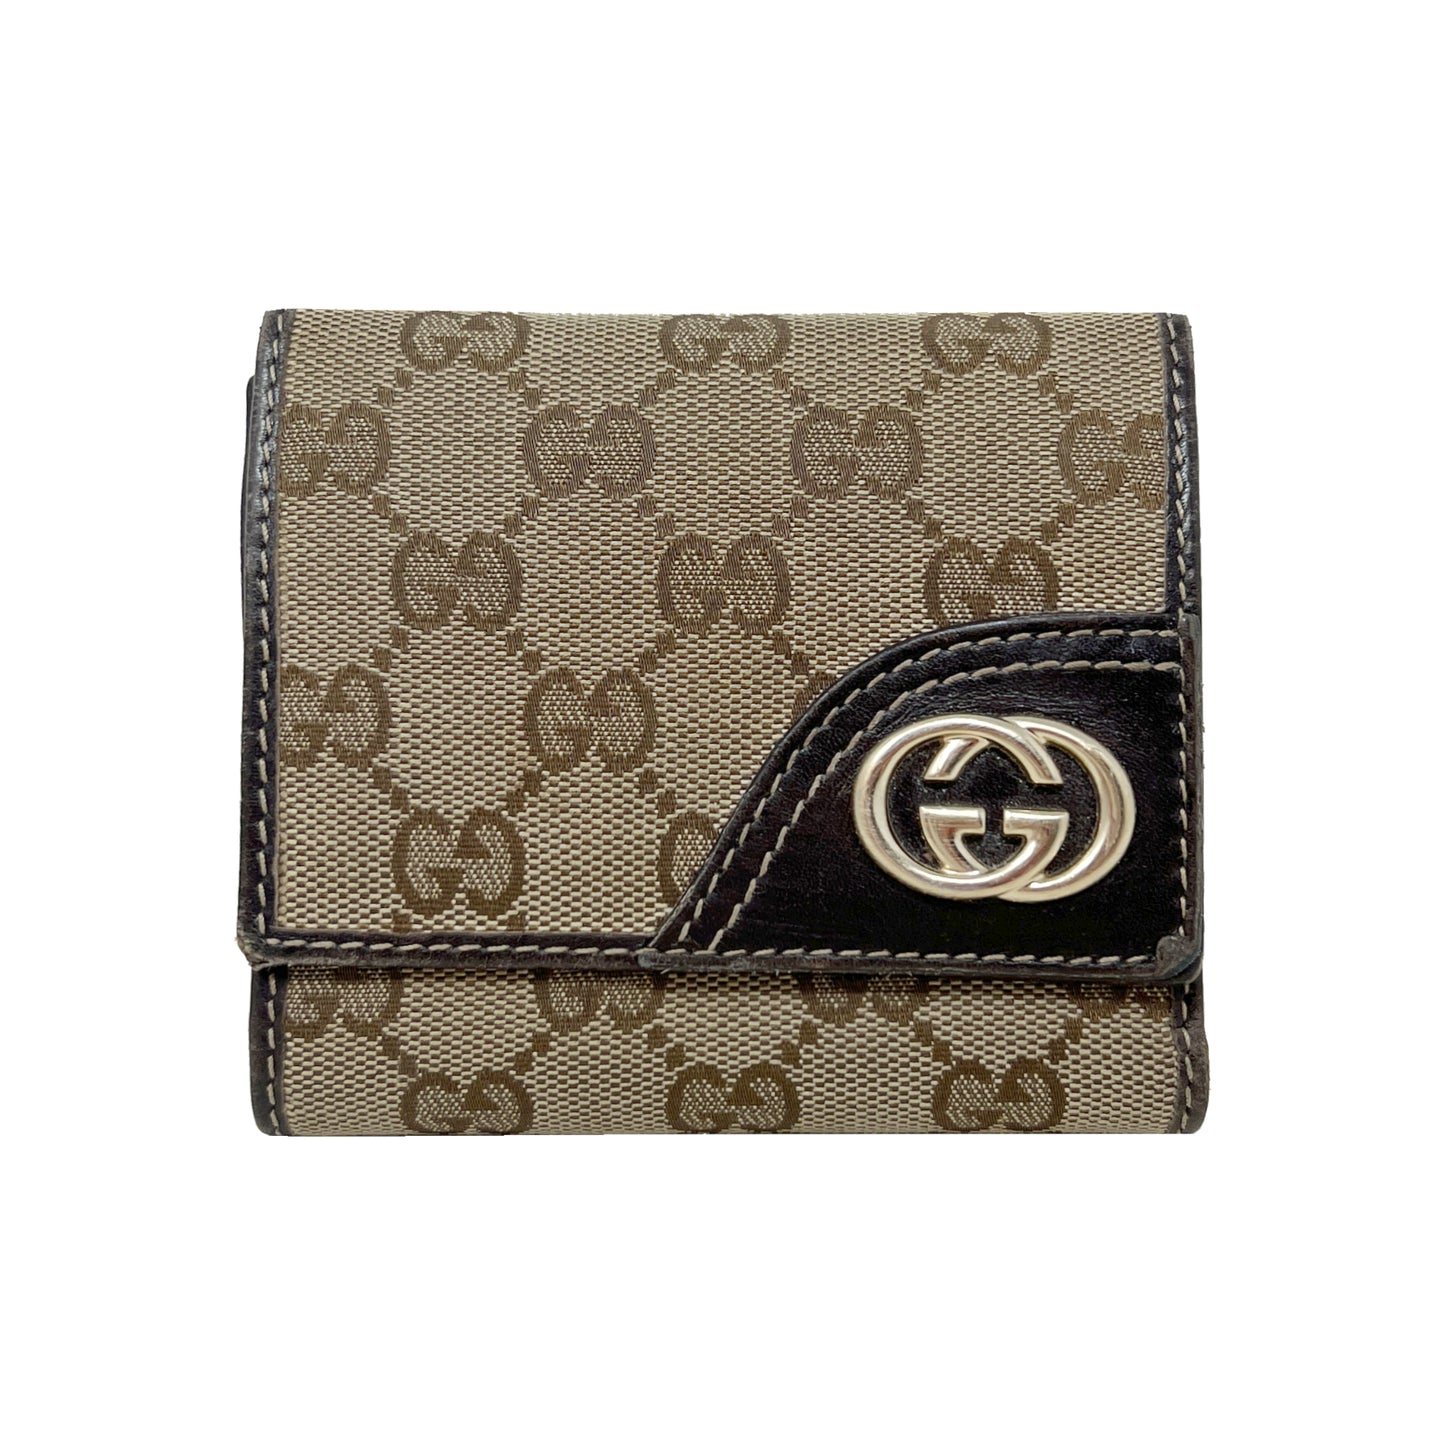 Gucci Interlocking GG Logo Monogrammed Leather Trimmed French Fold Square Wallet